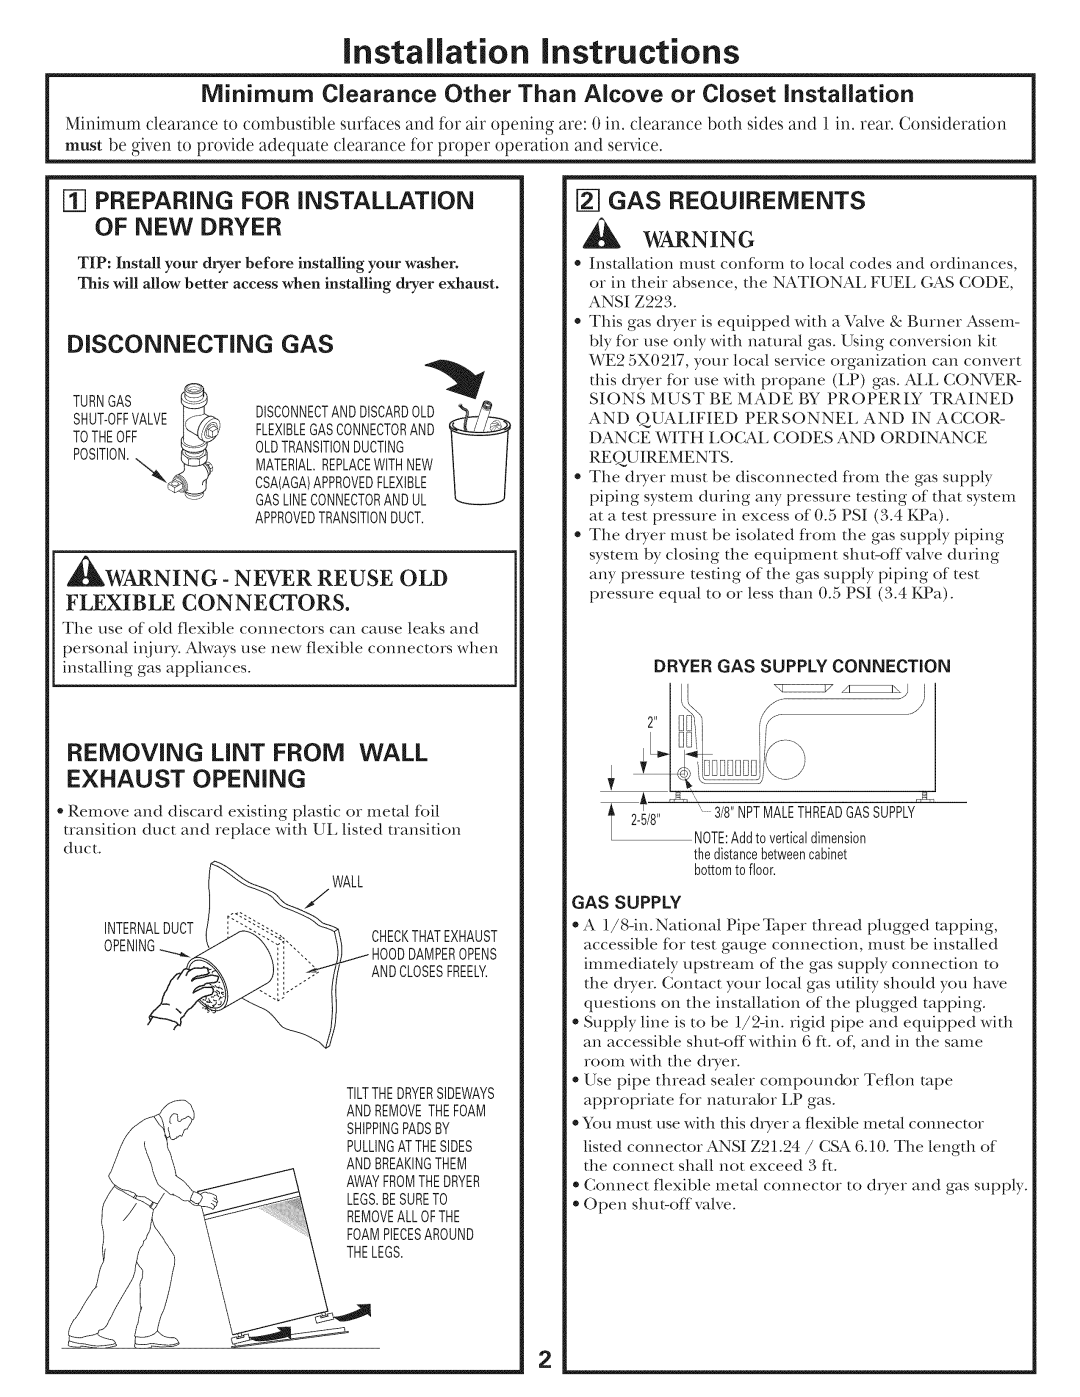 GE 500A436P006 Installation instructions, Minimum Clearance Other Than Alcove or Closet Installation, NEW Dryer 